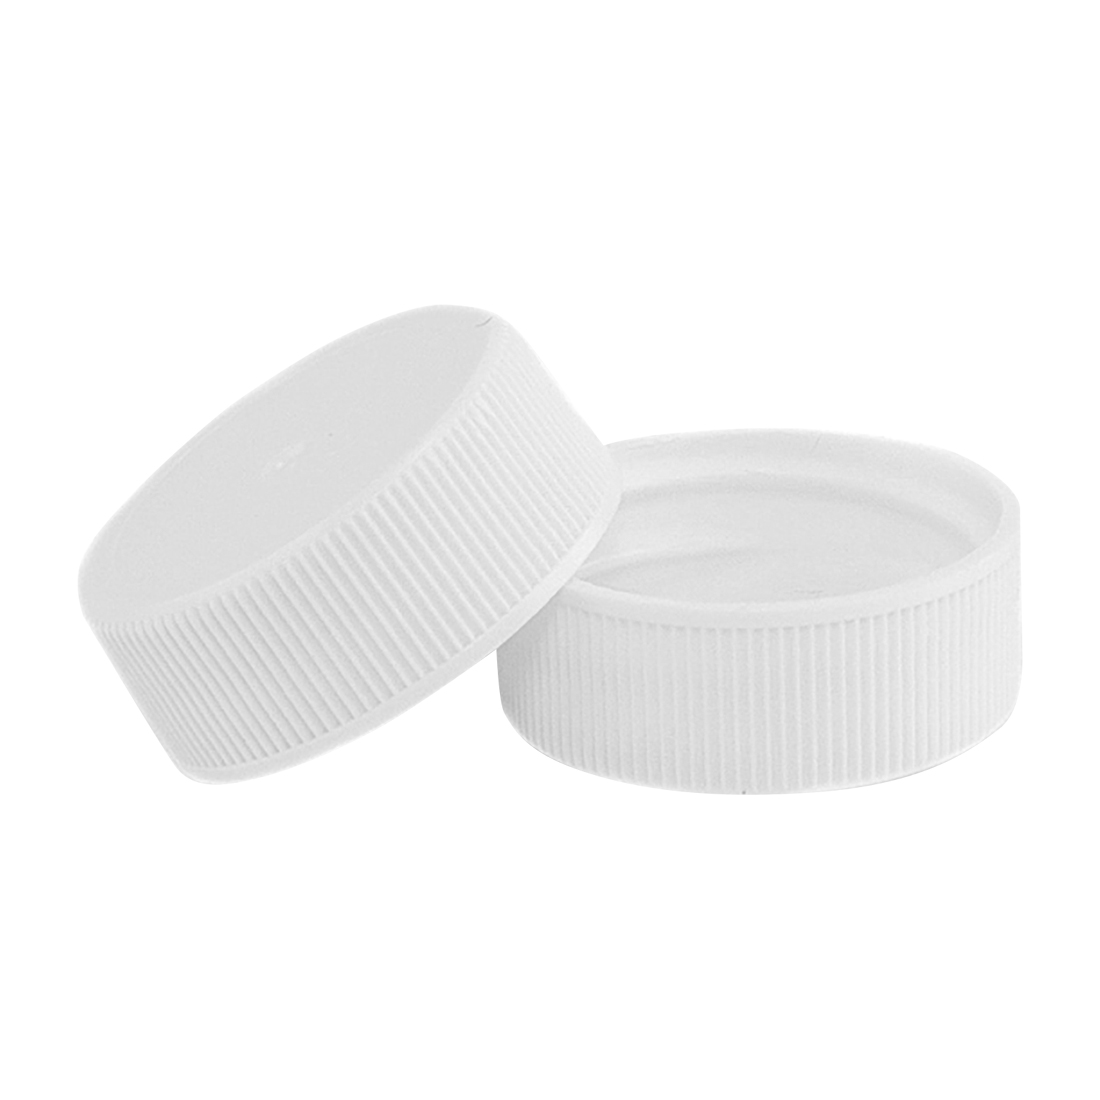 28-400, White, PP Matte Top, 
Ribbed Sides, Cap, F217 Liner, 
(Each)